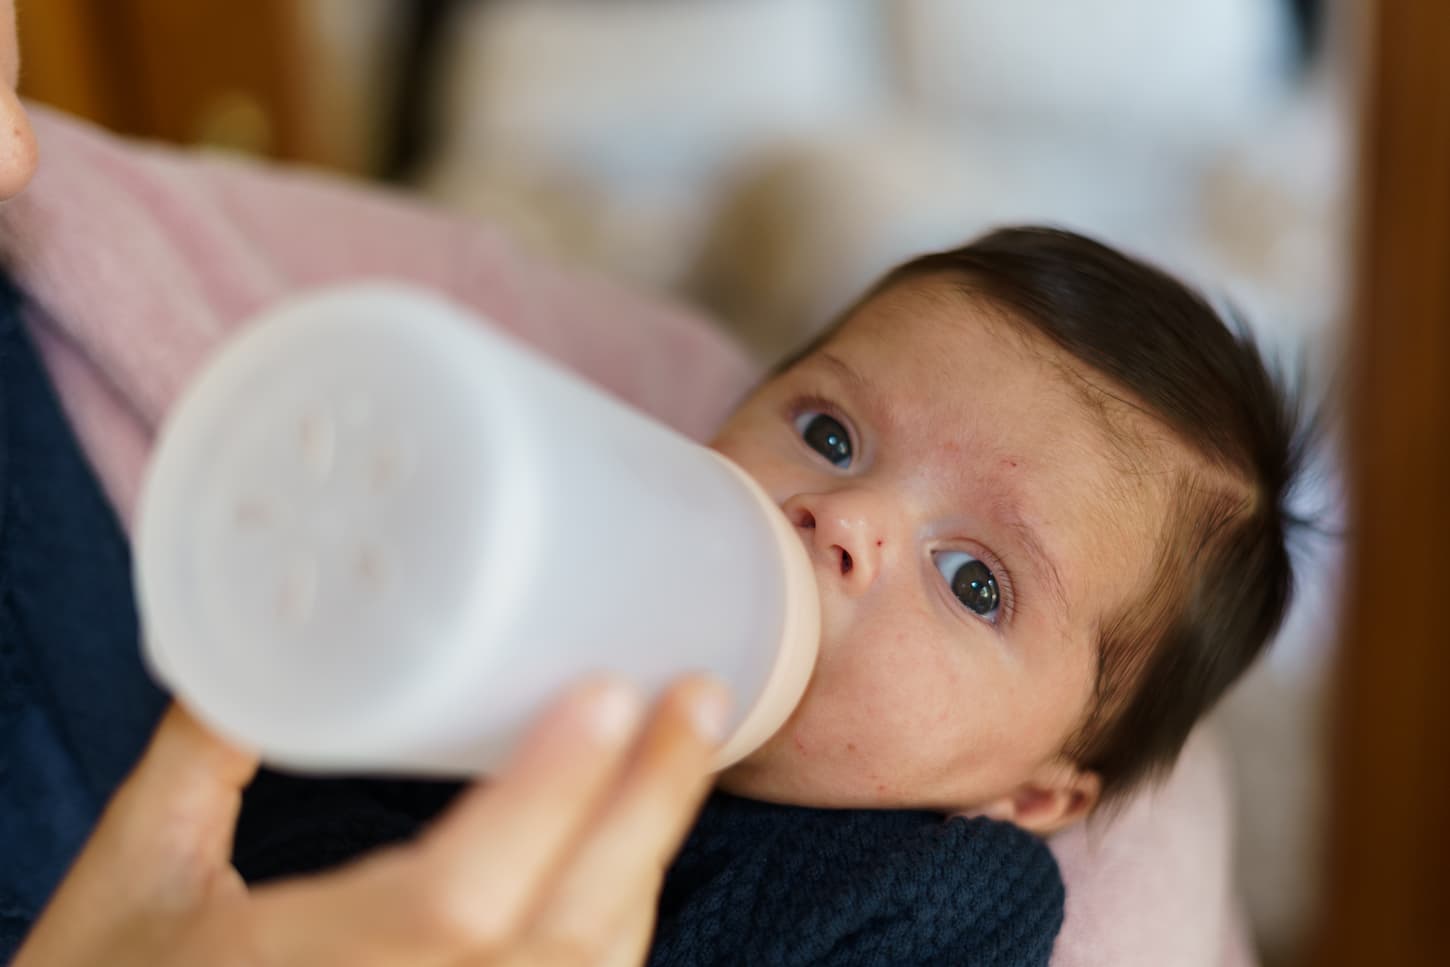 An image of a newborn baby drinking a baby's bottle of milk.